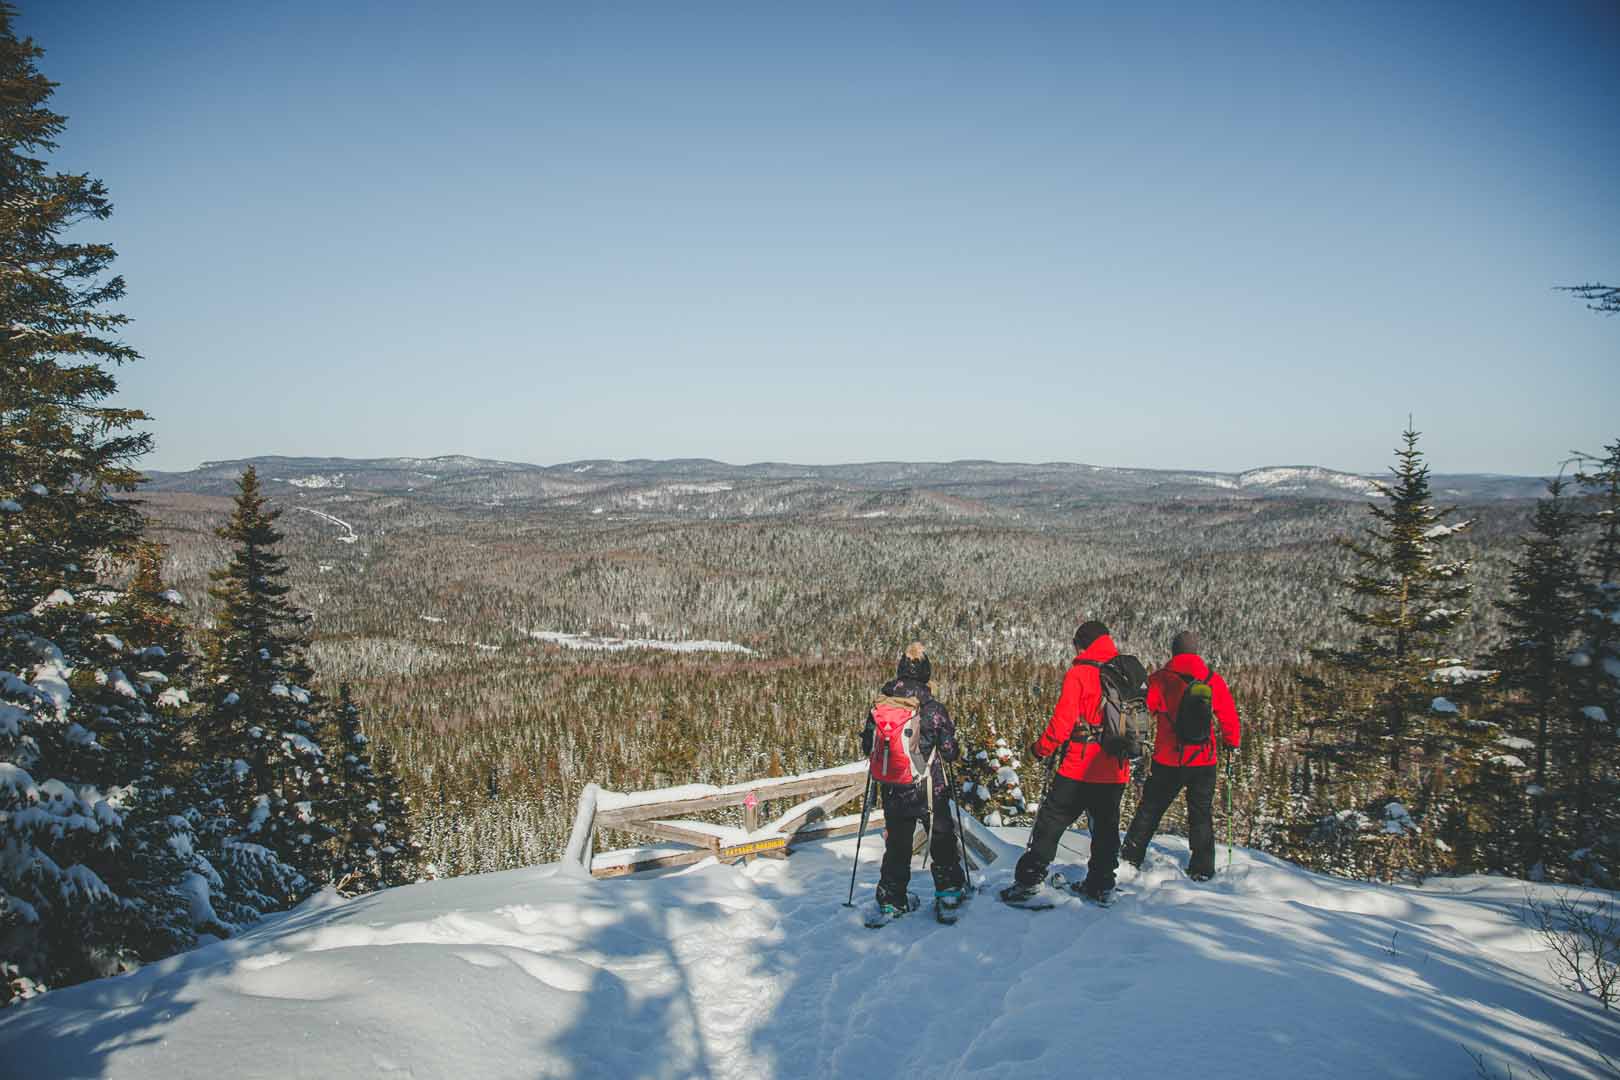 Bonjour Nature is a tourism solidarity travel agency, specializes about the Lanaudiere region